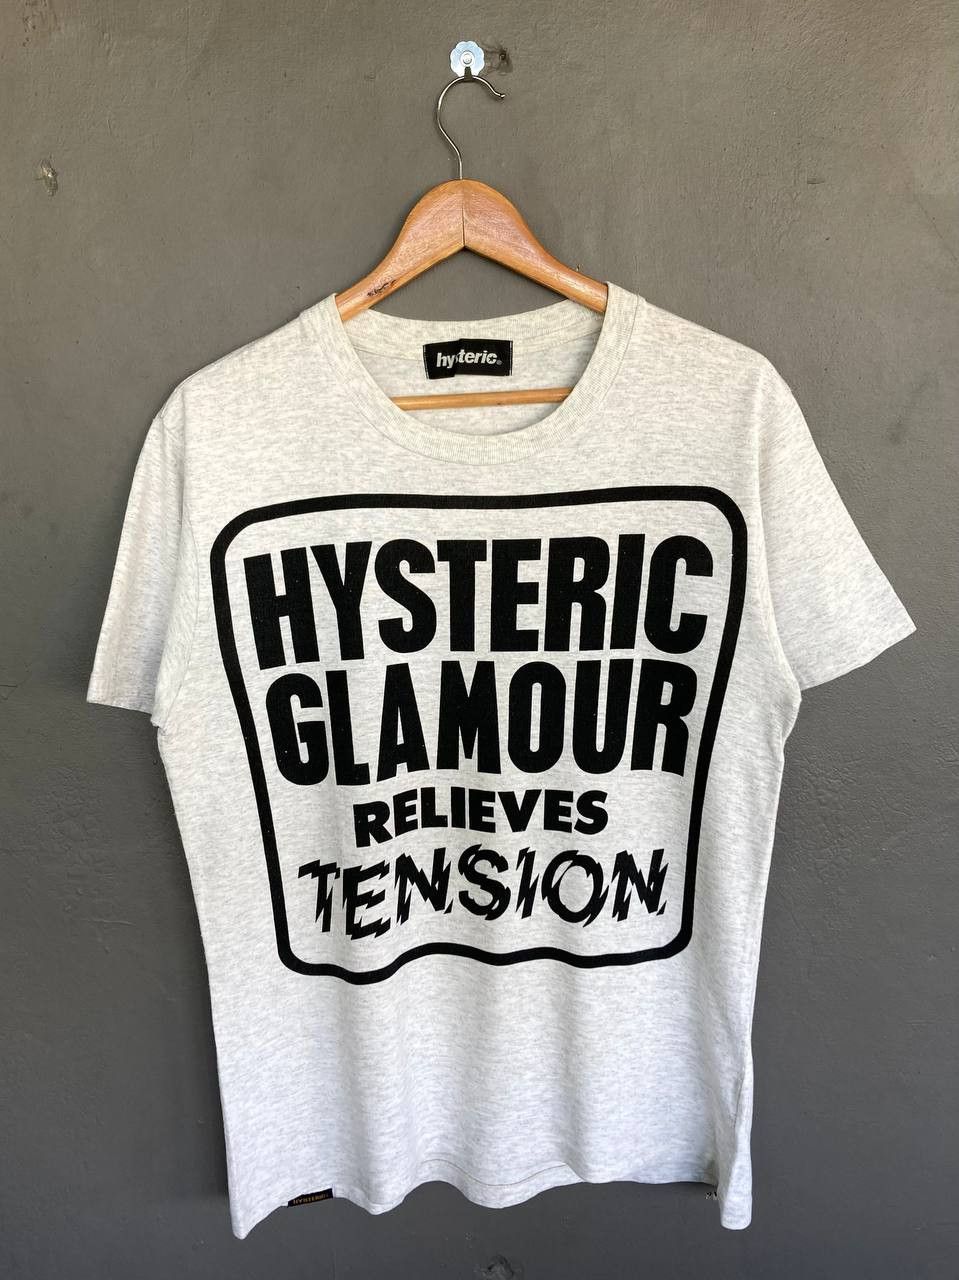 Vintage Hysteric Glamour “Relieves Tension” Tee - 1